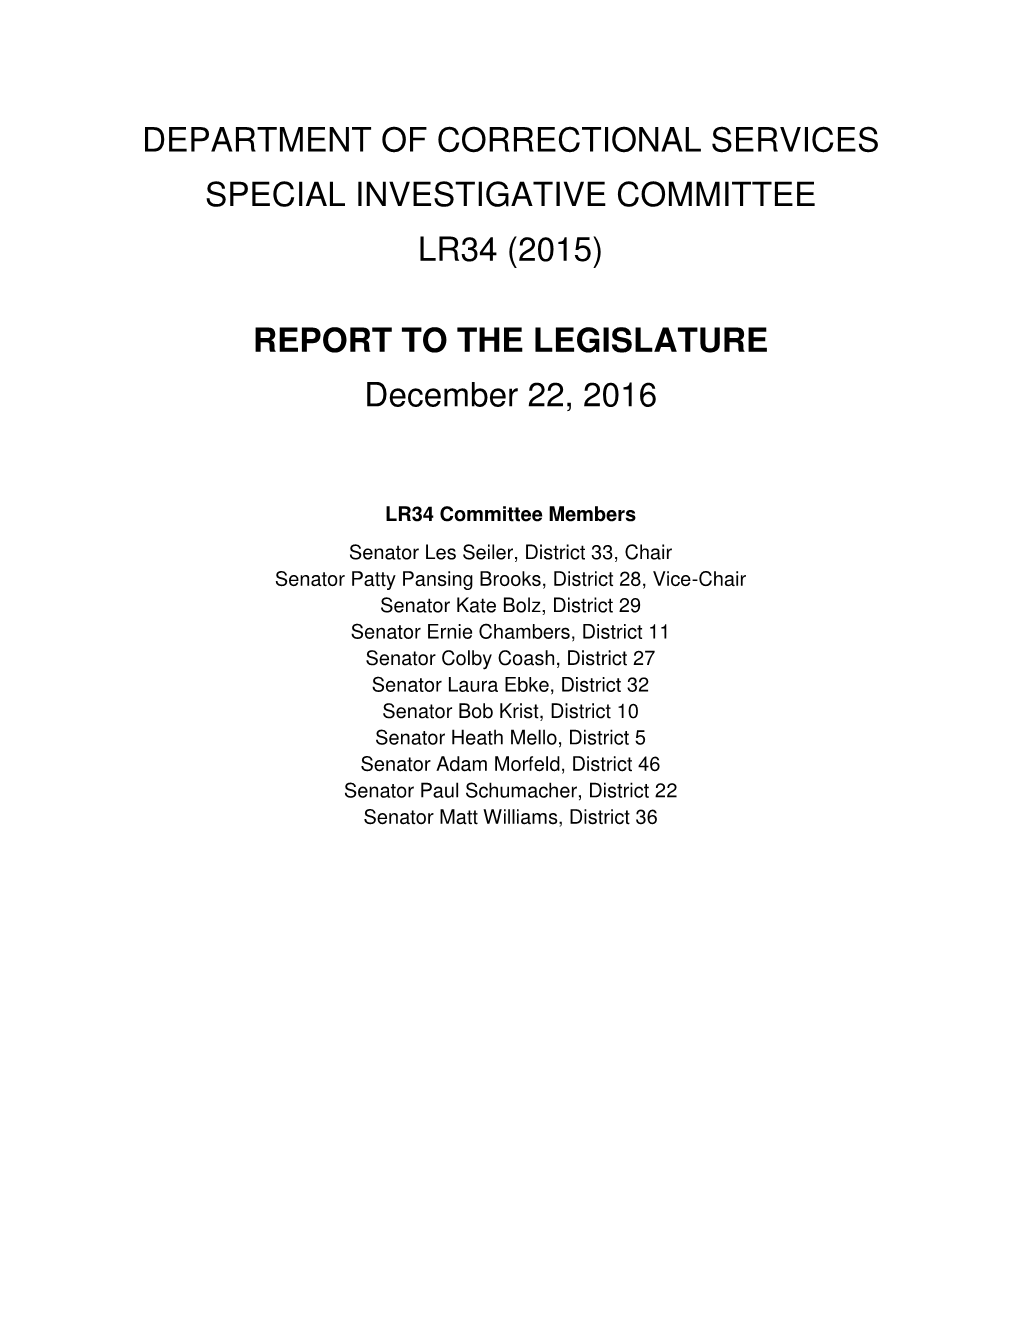 DEPARTMENT of CORRECTIONAL SERVICES SPECIAL INVESTIGATIVE COMMITTEE LR34 (2015) REPORT to the LEGISLATURE December 22, 2016